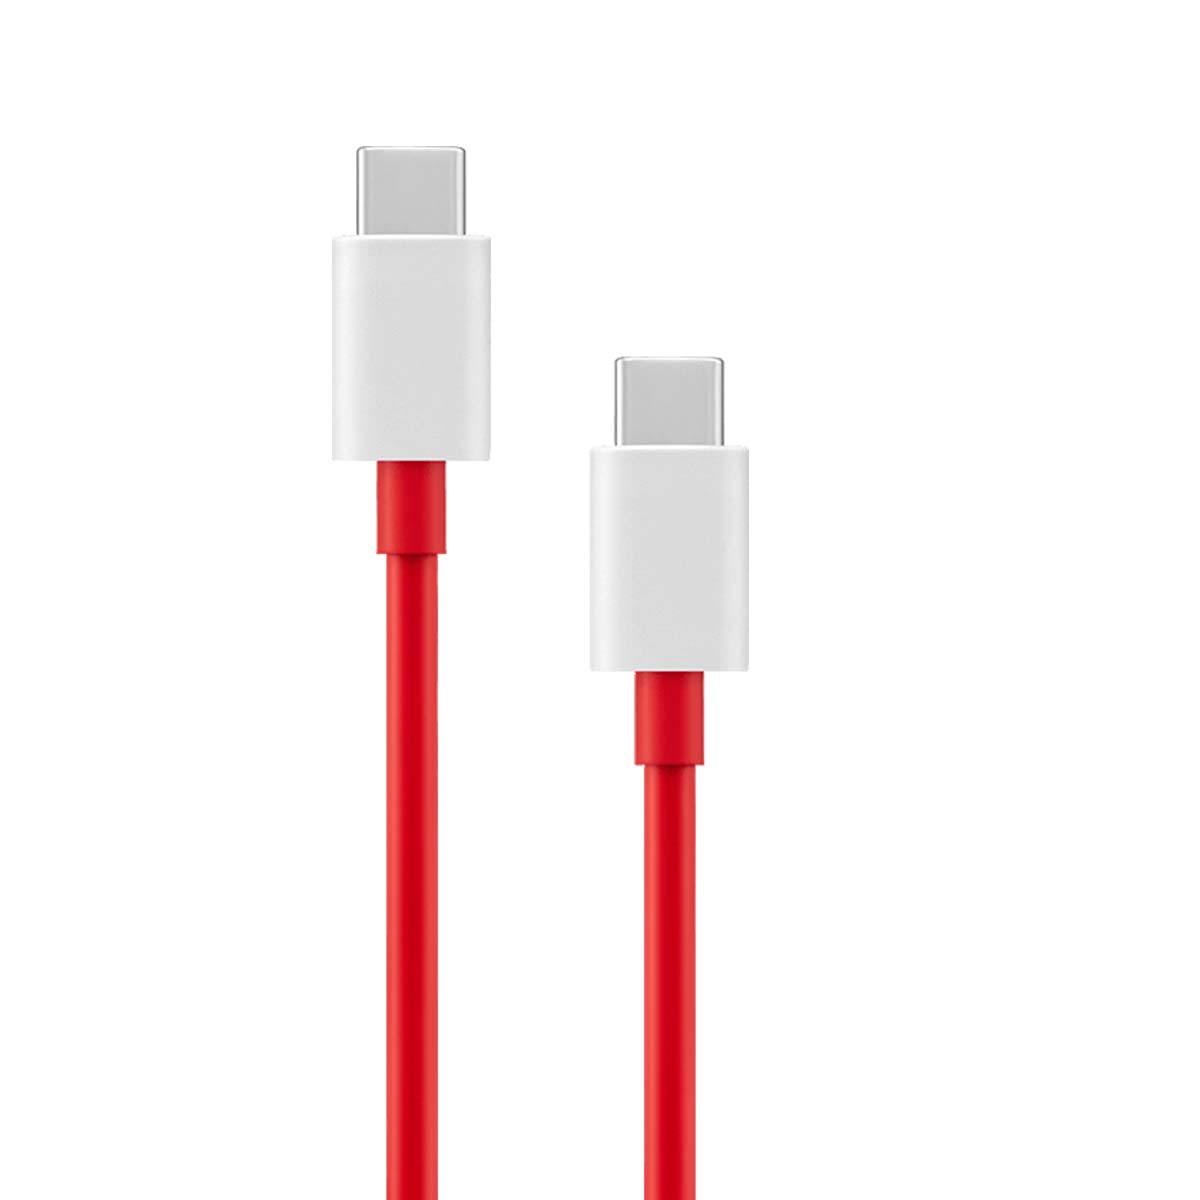 OnePlus C to C Cable